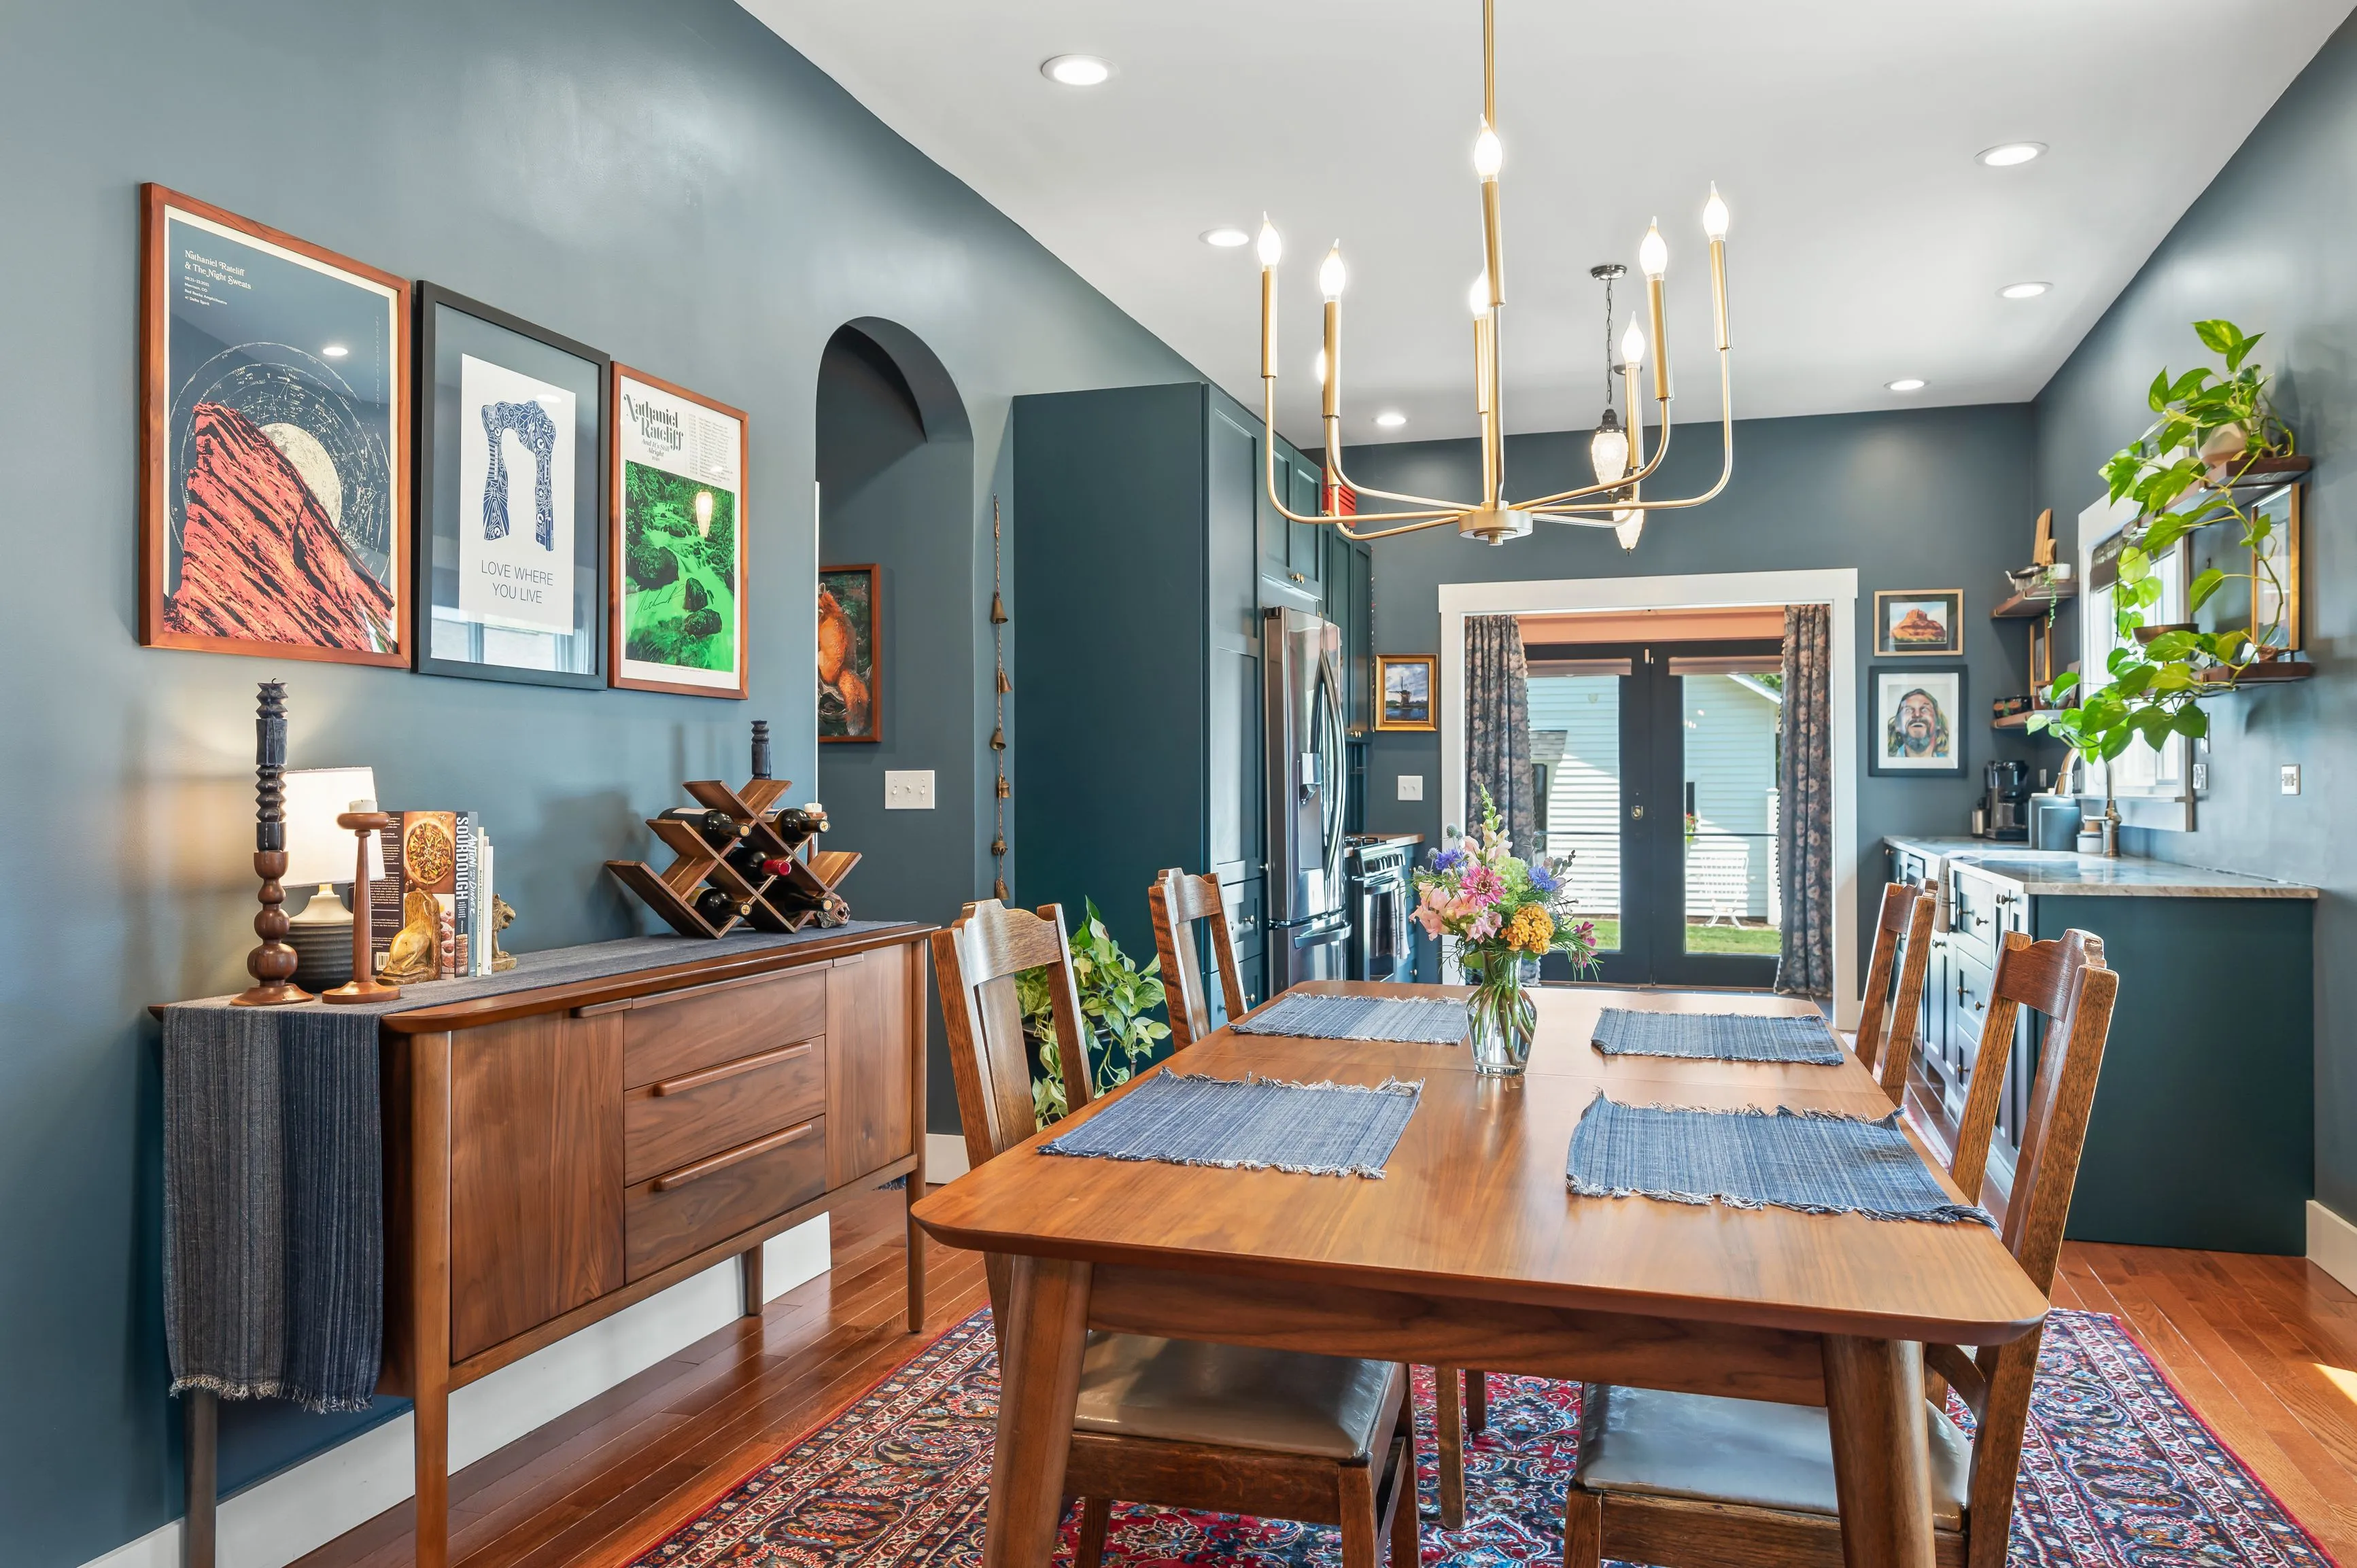 Elegantly decorated dining room with a wooden table, blue upholstered chairs, and a modern chandelier, surrounded by artwork on blue walls and a wooden sideboard on one side.